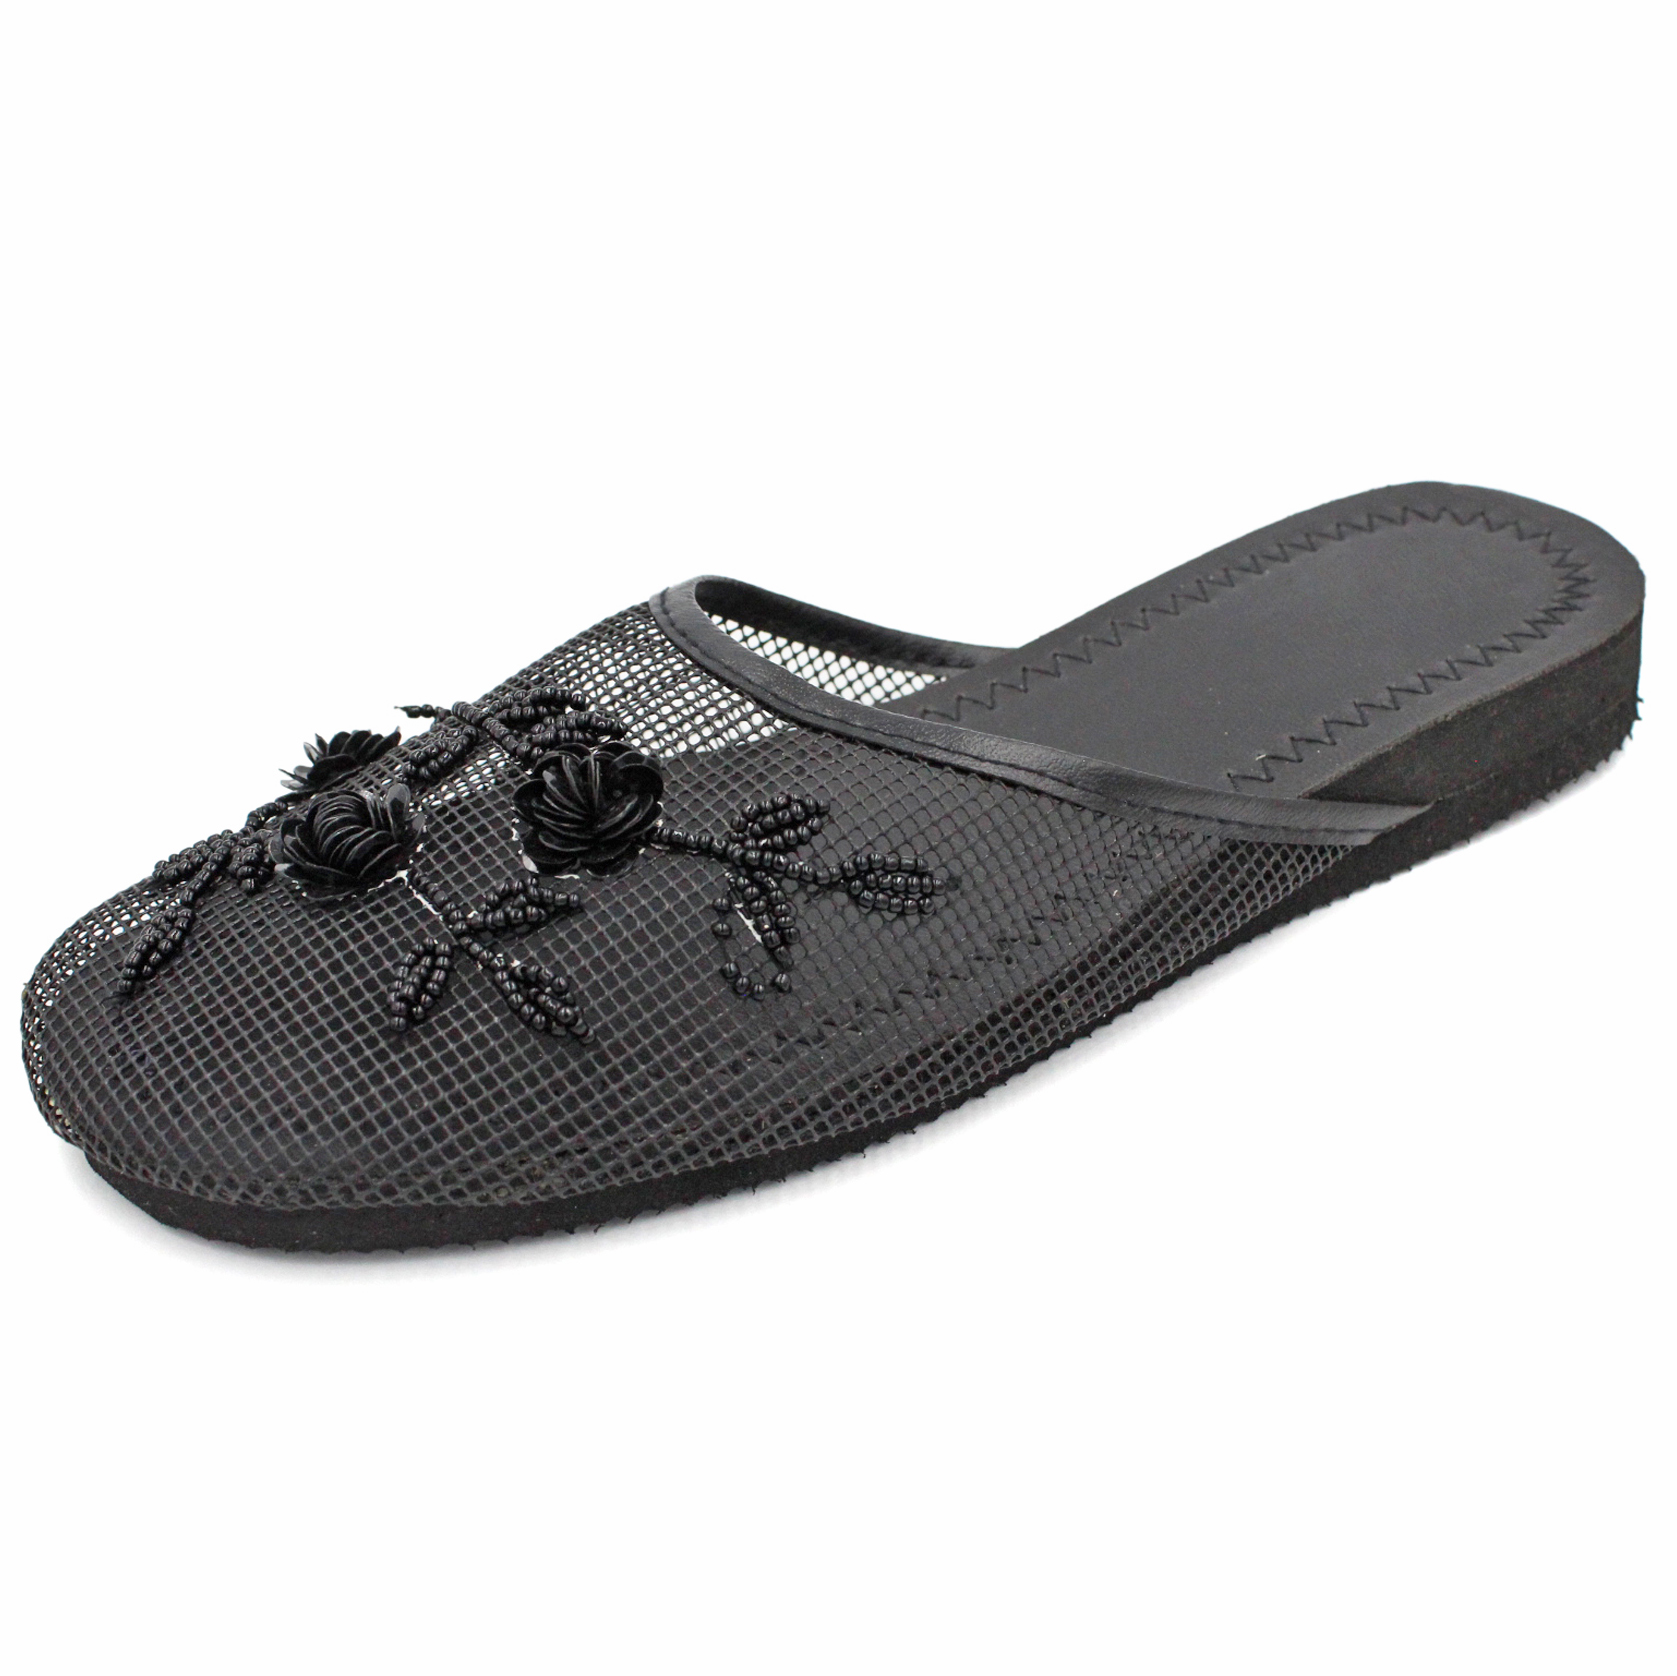 2019 Women Chinese Mesh Floral Slippers Slides Slip On Flats Flip Flop Loafers